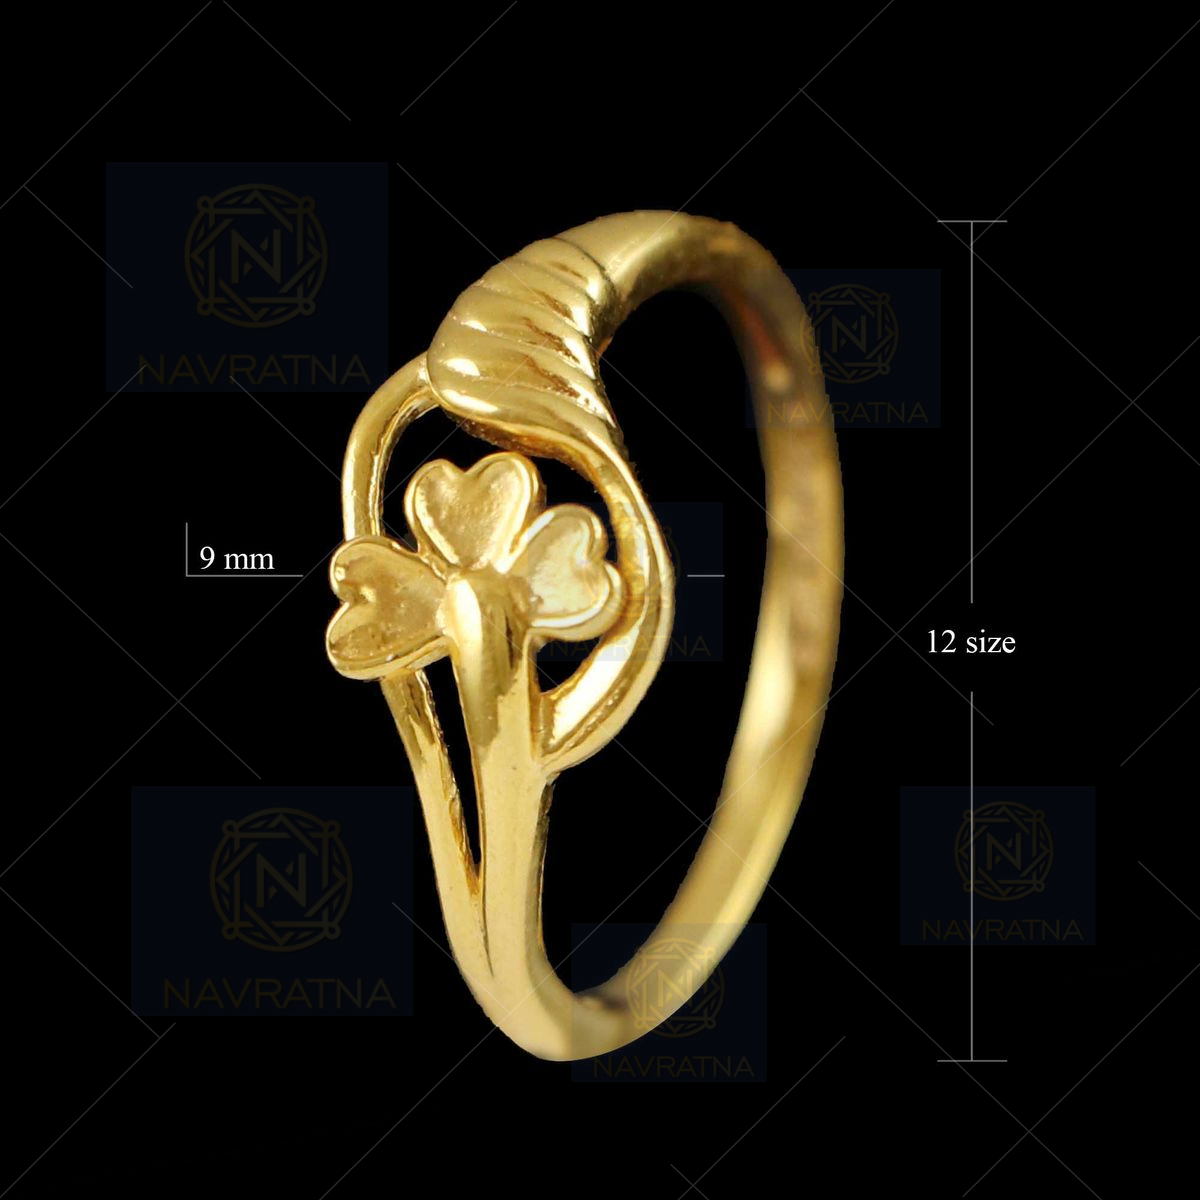 Buy quality 22k gold leaf rodium exclusive casting ring in Ahmedabad